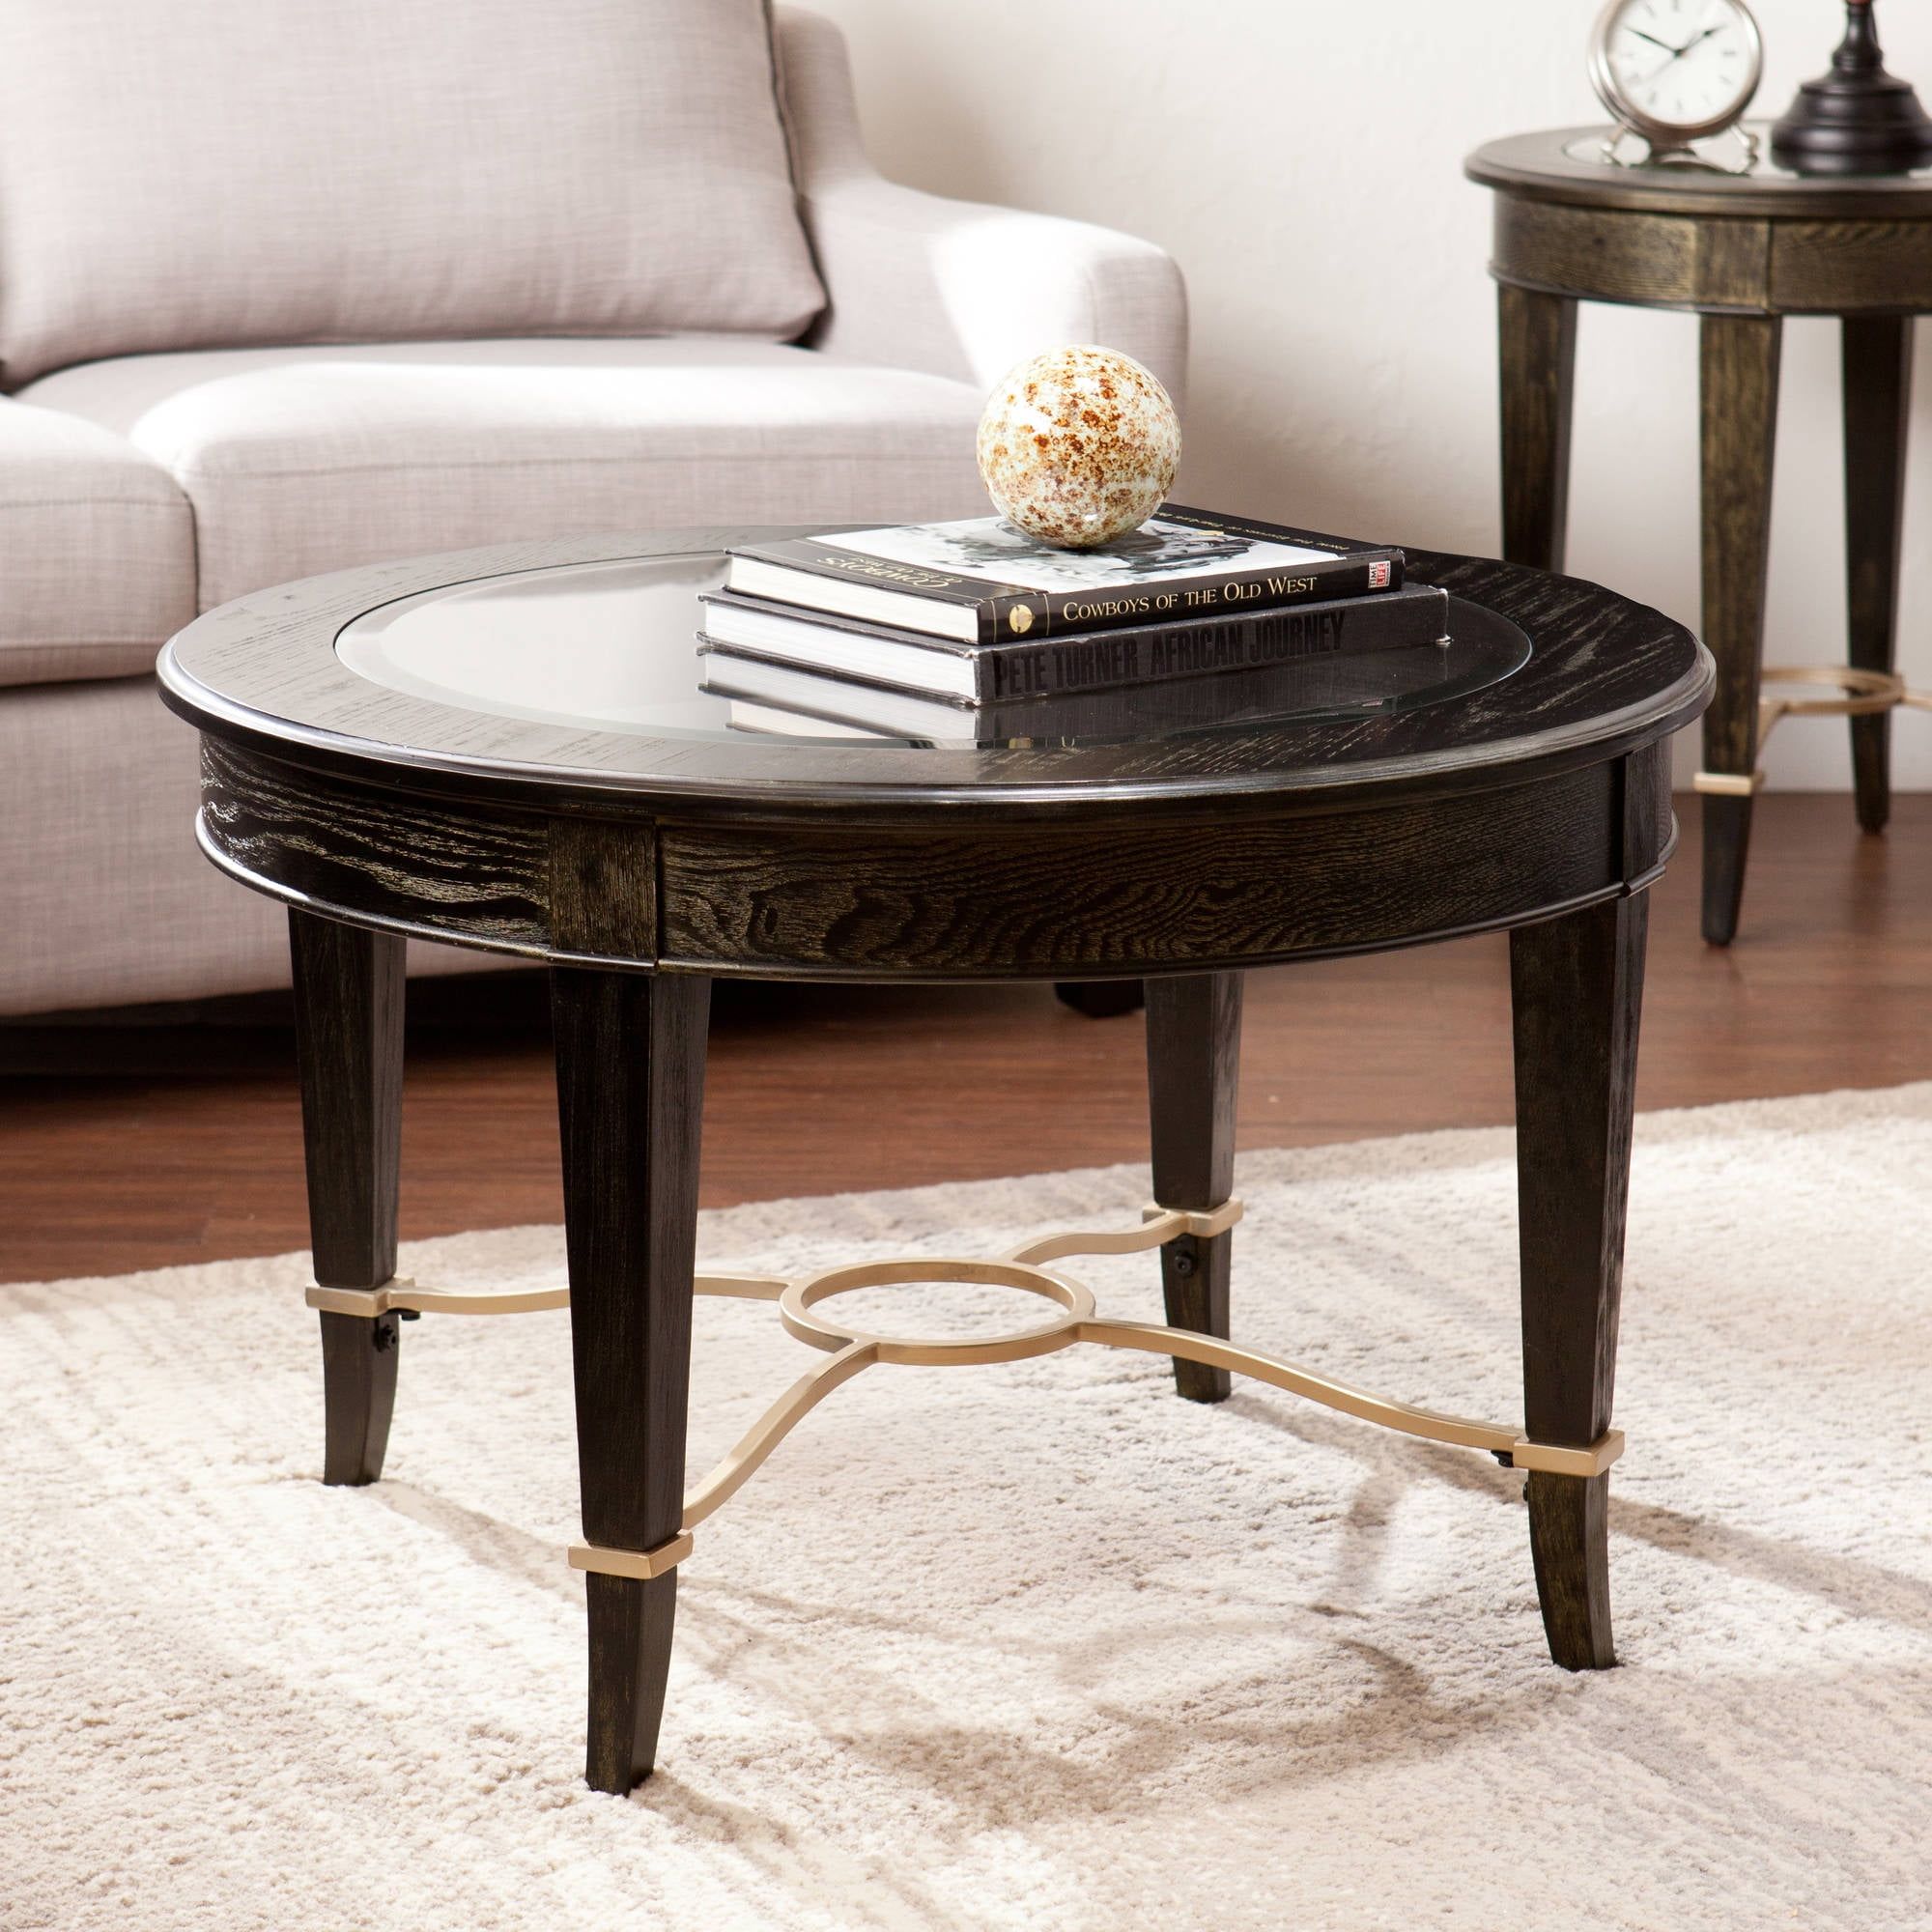 Southern Enterprises Regency Round Coffee Table, Black – Walmart Intended For Southern Enterprises Larksmill Coffee Tables (View 5 of 20)